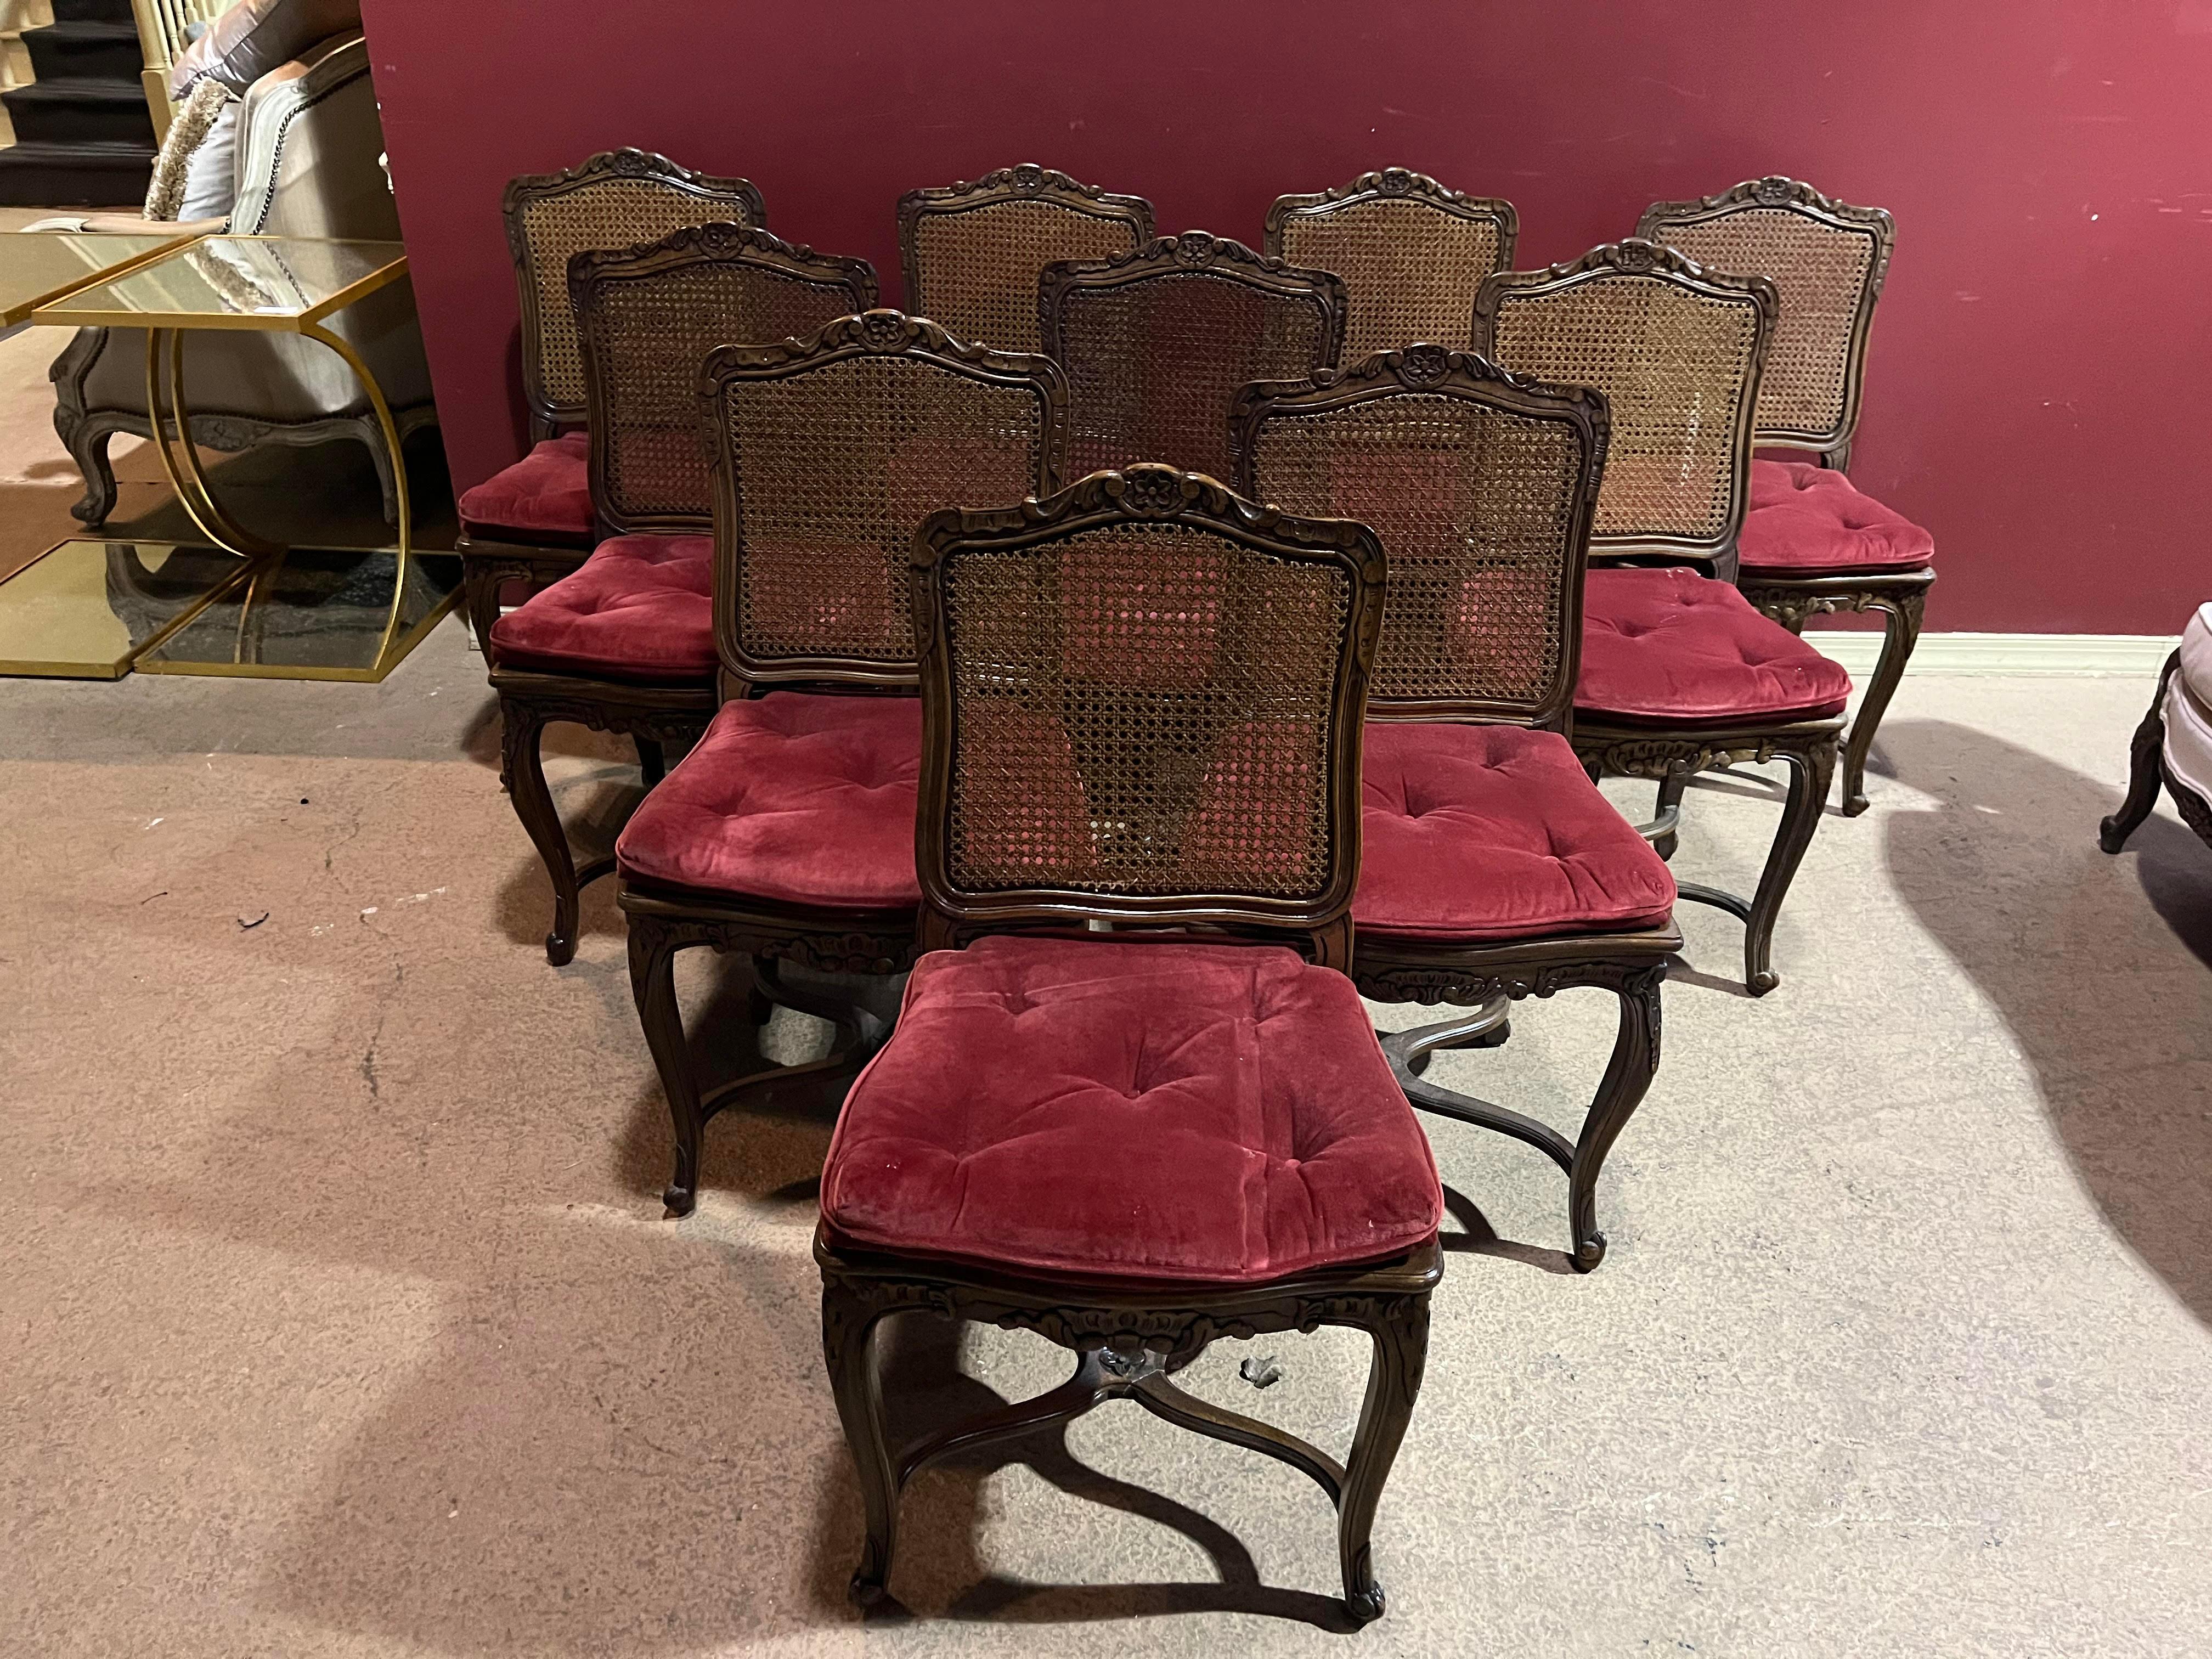 This is a great high quality set of 8 Louis XV style dining chairs. The chairs are in very good condition with no cane damage and cushions that are attached to the cane and protected the seats. The chairs have beautiful stretchers too. They each